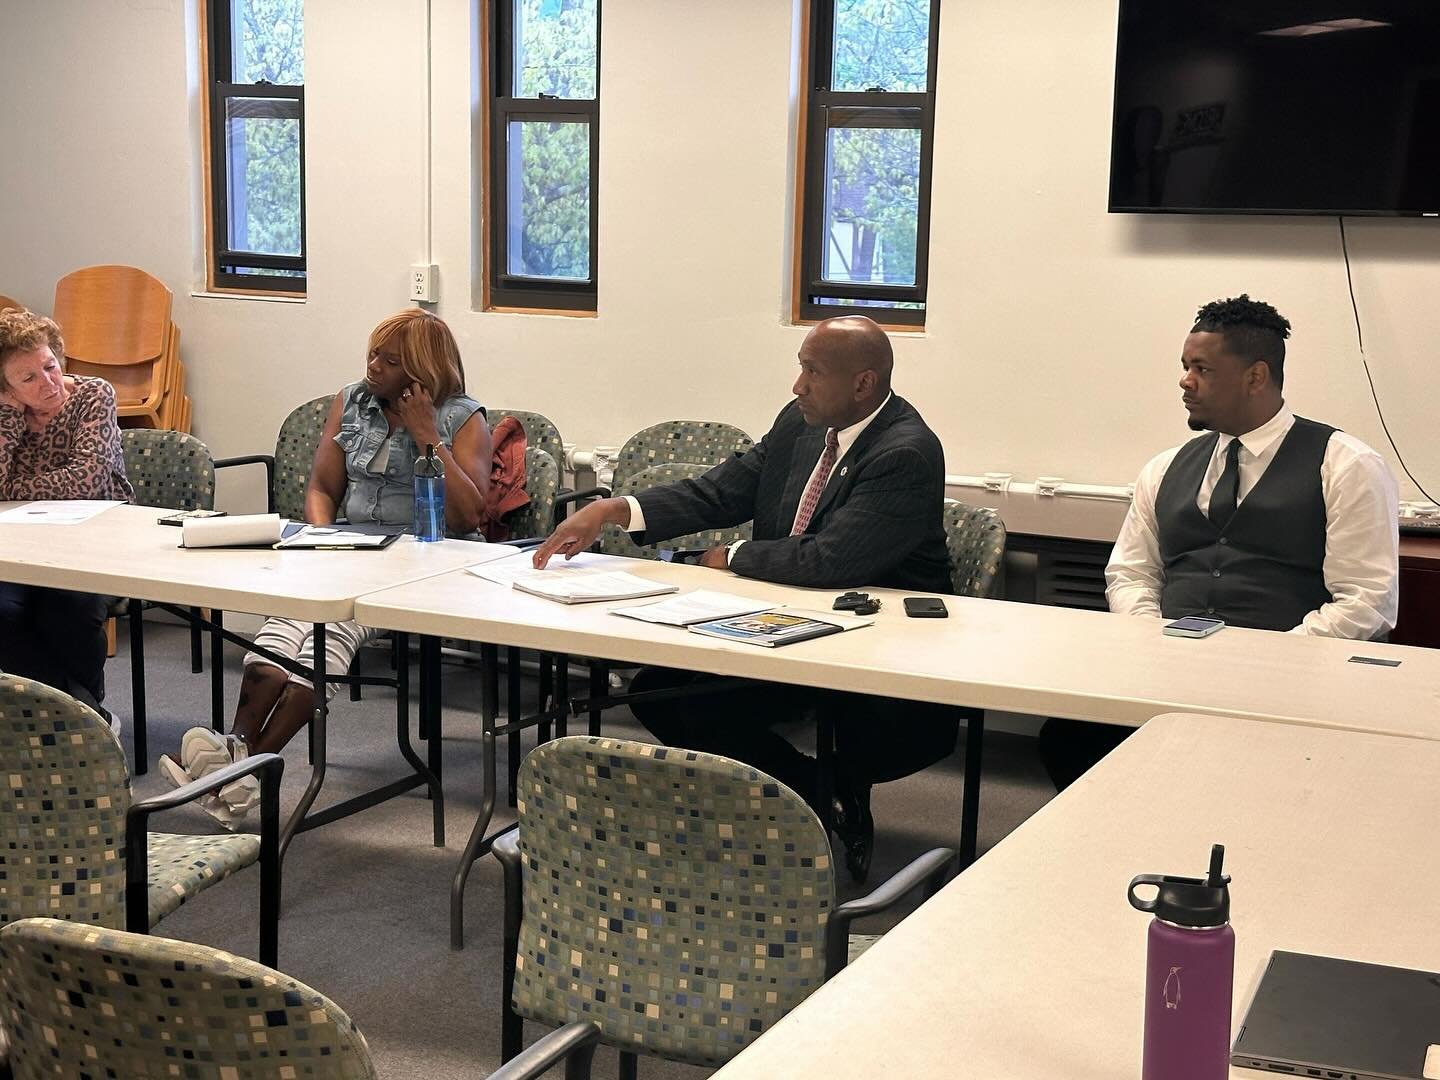 Tonight, at the Mount Hope Canterbury Neighborhood Association, we connected with residents, fostering productive dialogue and staying tuned in to Boston&rsquo;s diverse communities.